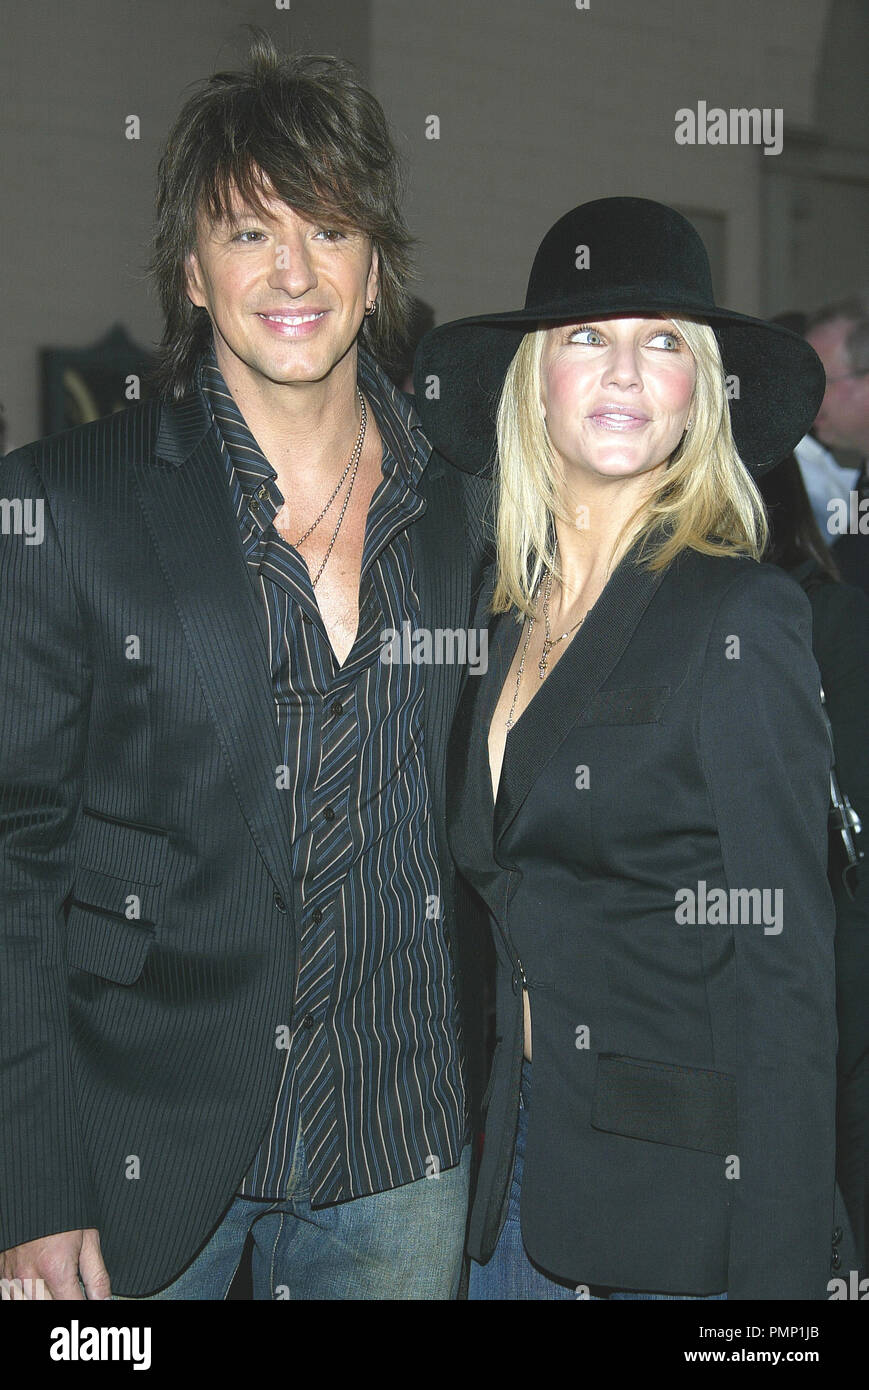 11/14/2004 Jessica Simpson 32ND ANNUAL AMERICAN MUSIC AWARDS @ Shrine  Auditorium, Downtown Los Angeles Photo by I. Hasegawa / HNW / PictureLux  File Reference # 31452 006HNW For Editorial Use Only - All Rights Reserved  Stock Photo - Alamy